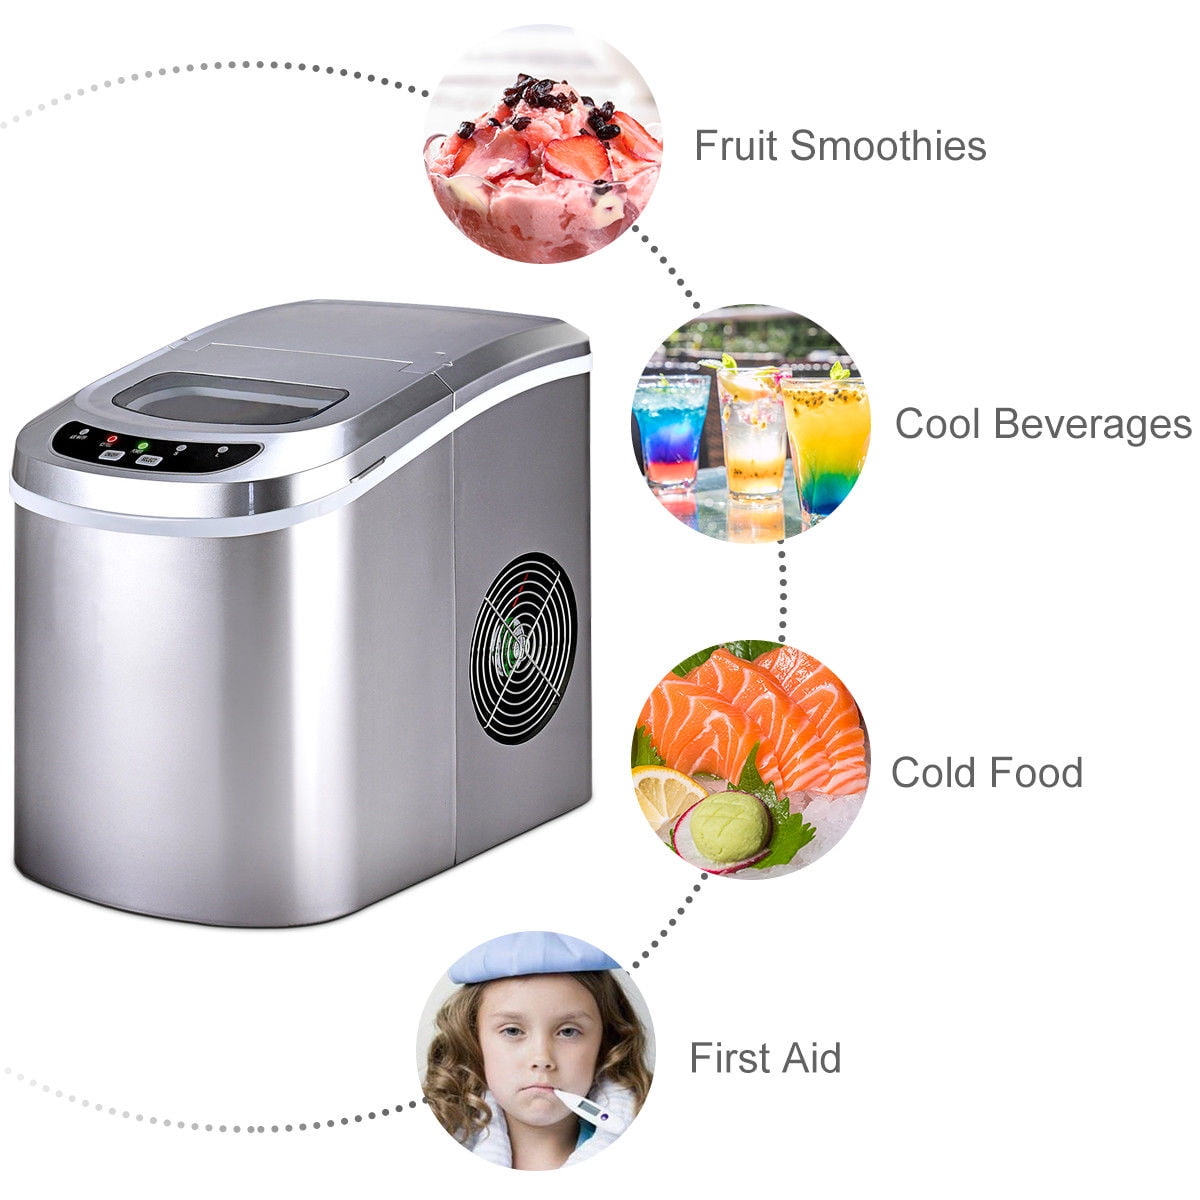 Costway Portable Compact Electric Ice Maker Machine Mini Cube 26lb/Day ABS  Navy